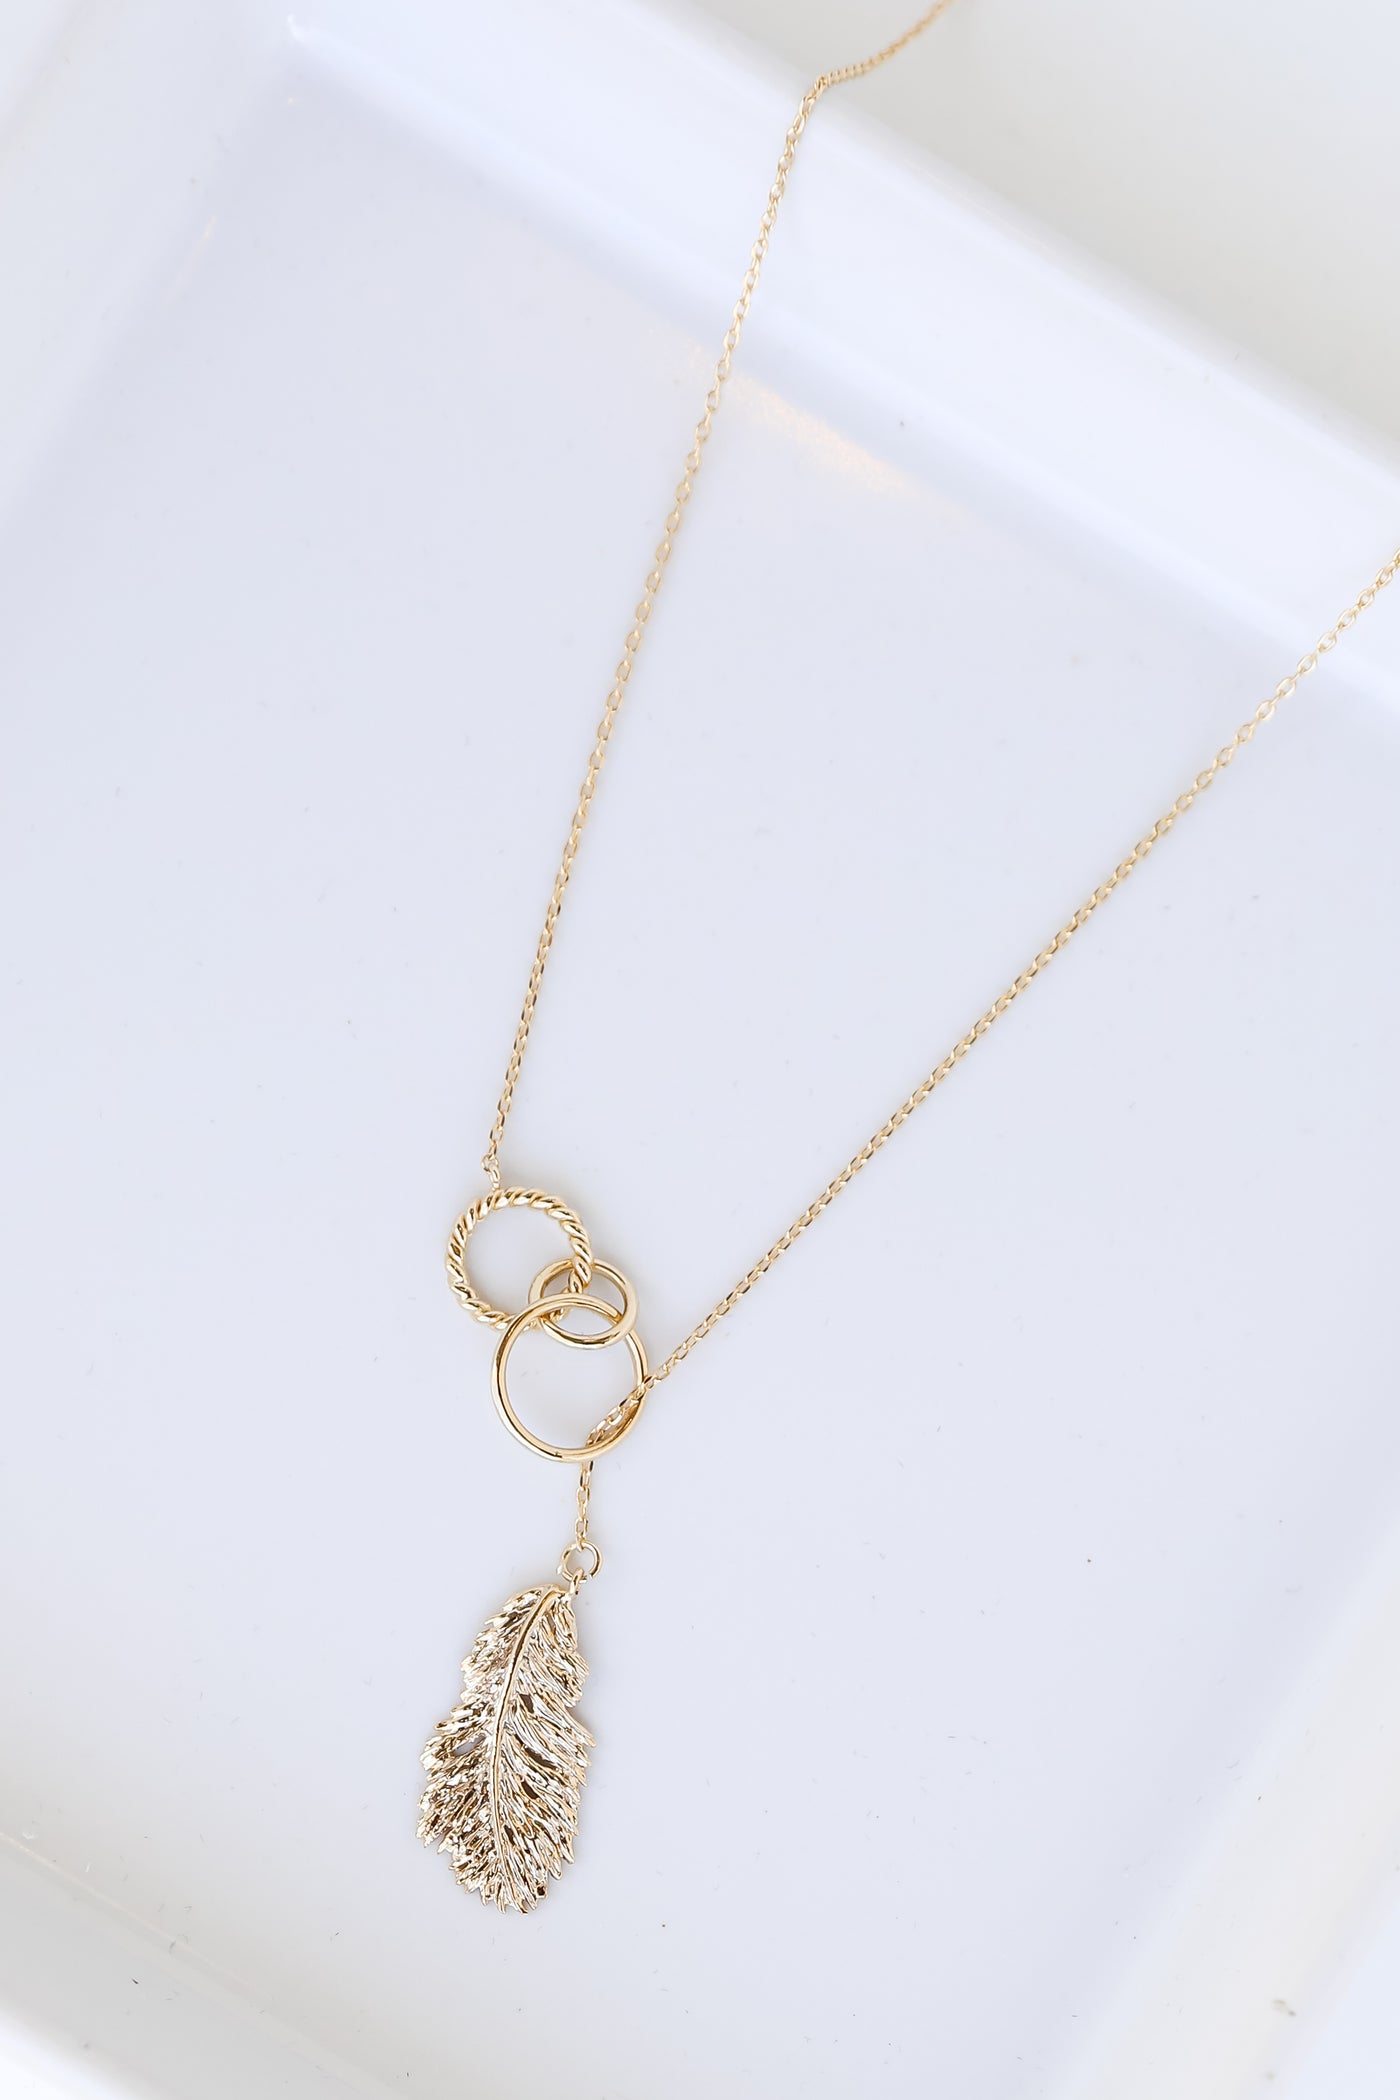 Gold Leaf Necklace from dress up